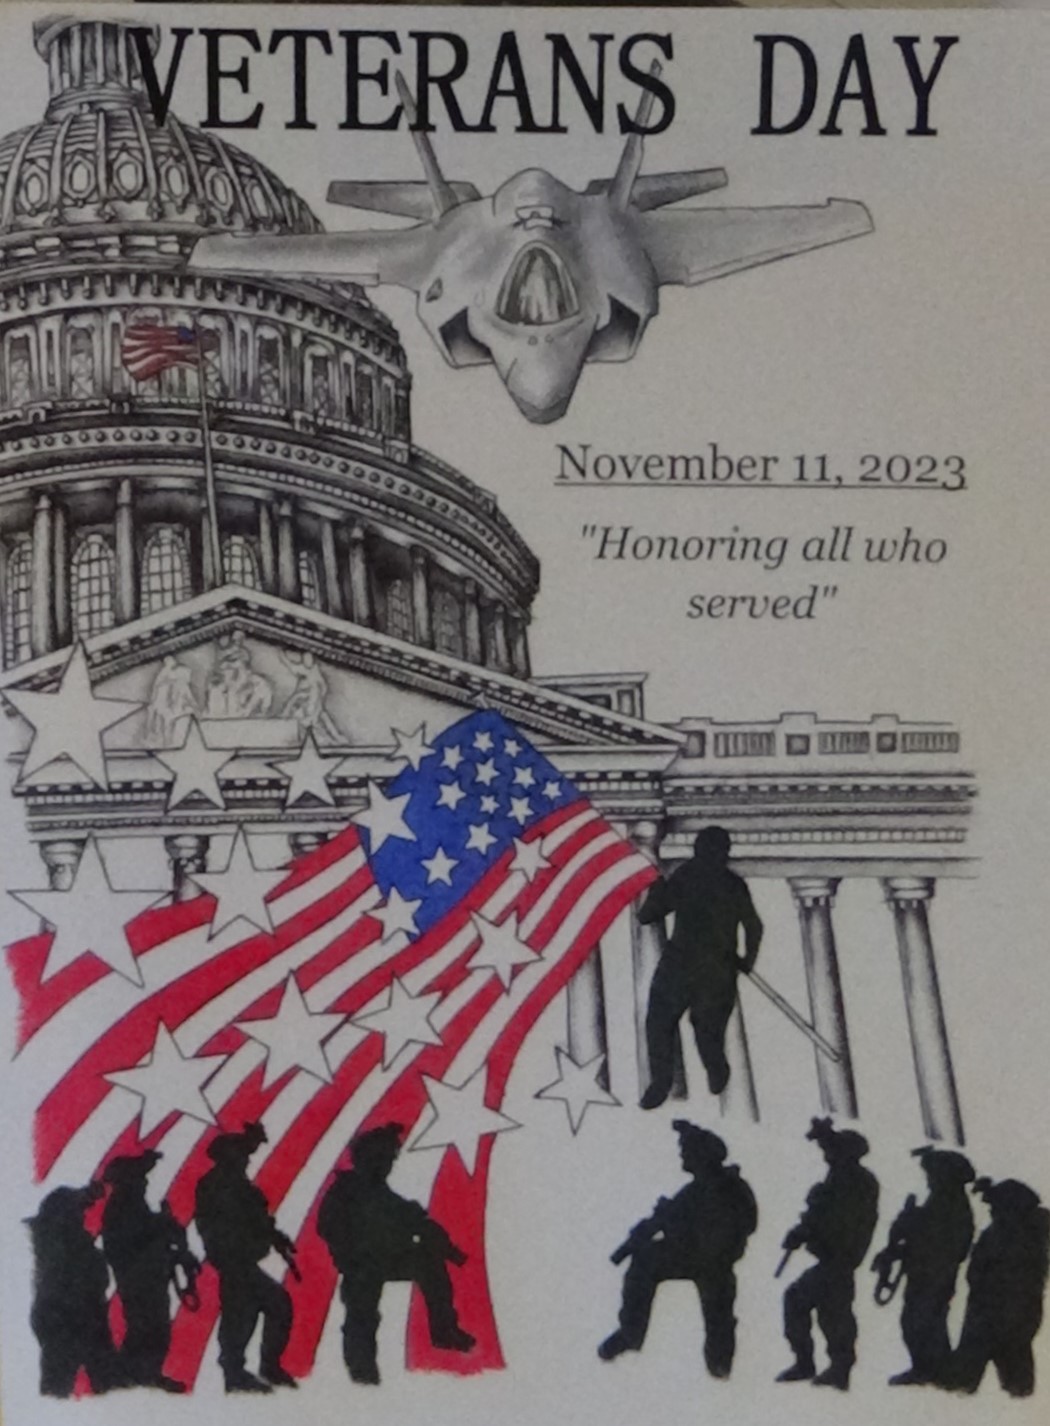 A poster that says "Veterans Day, November 11, 2013, Honoring all who served and features the Capitol, a fighter jet, an America